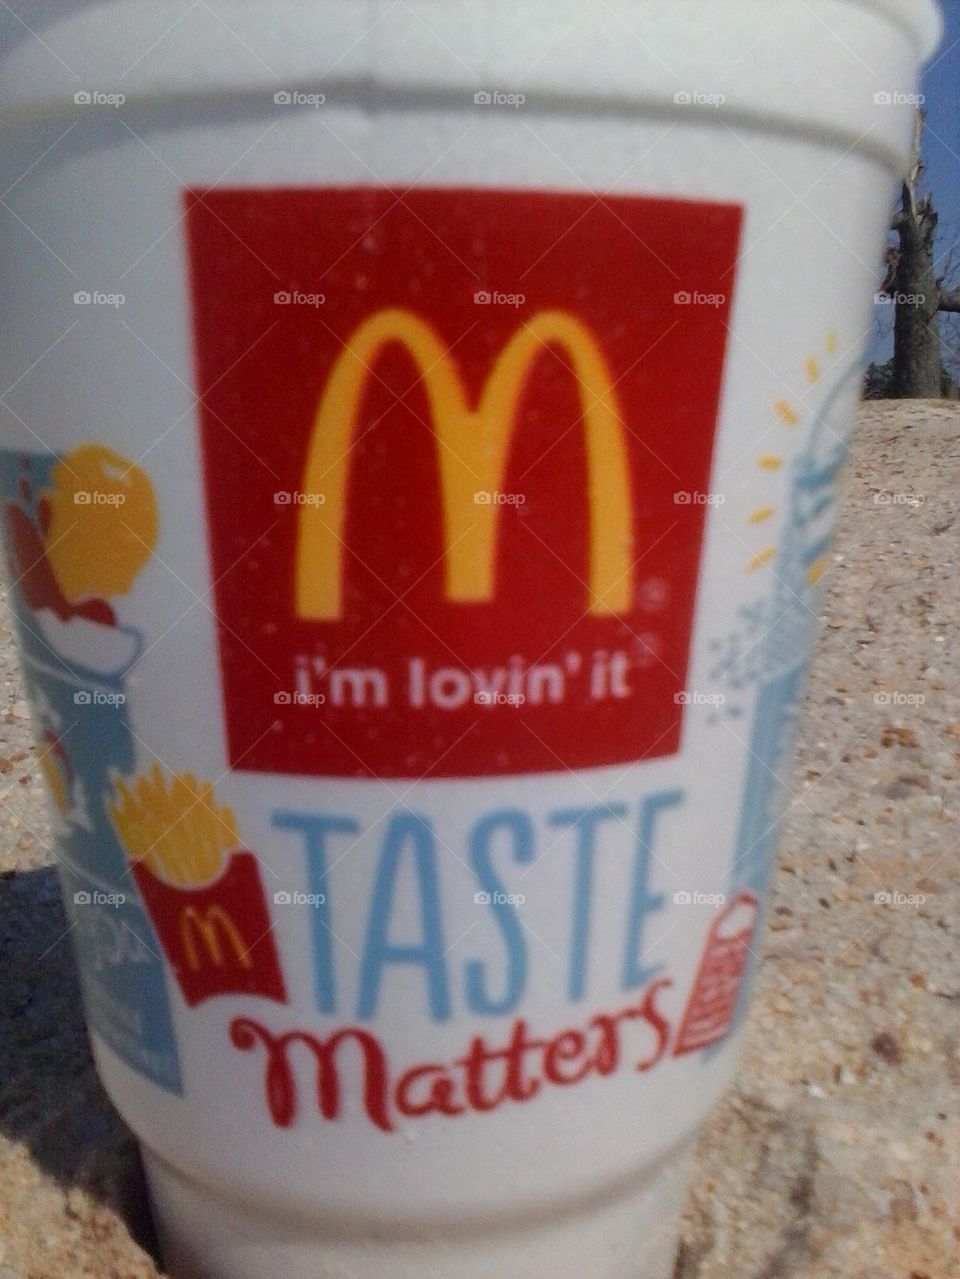 McDonalds cup in the sand